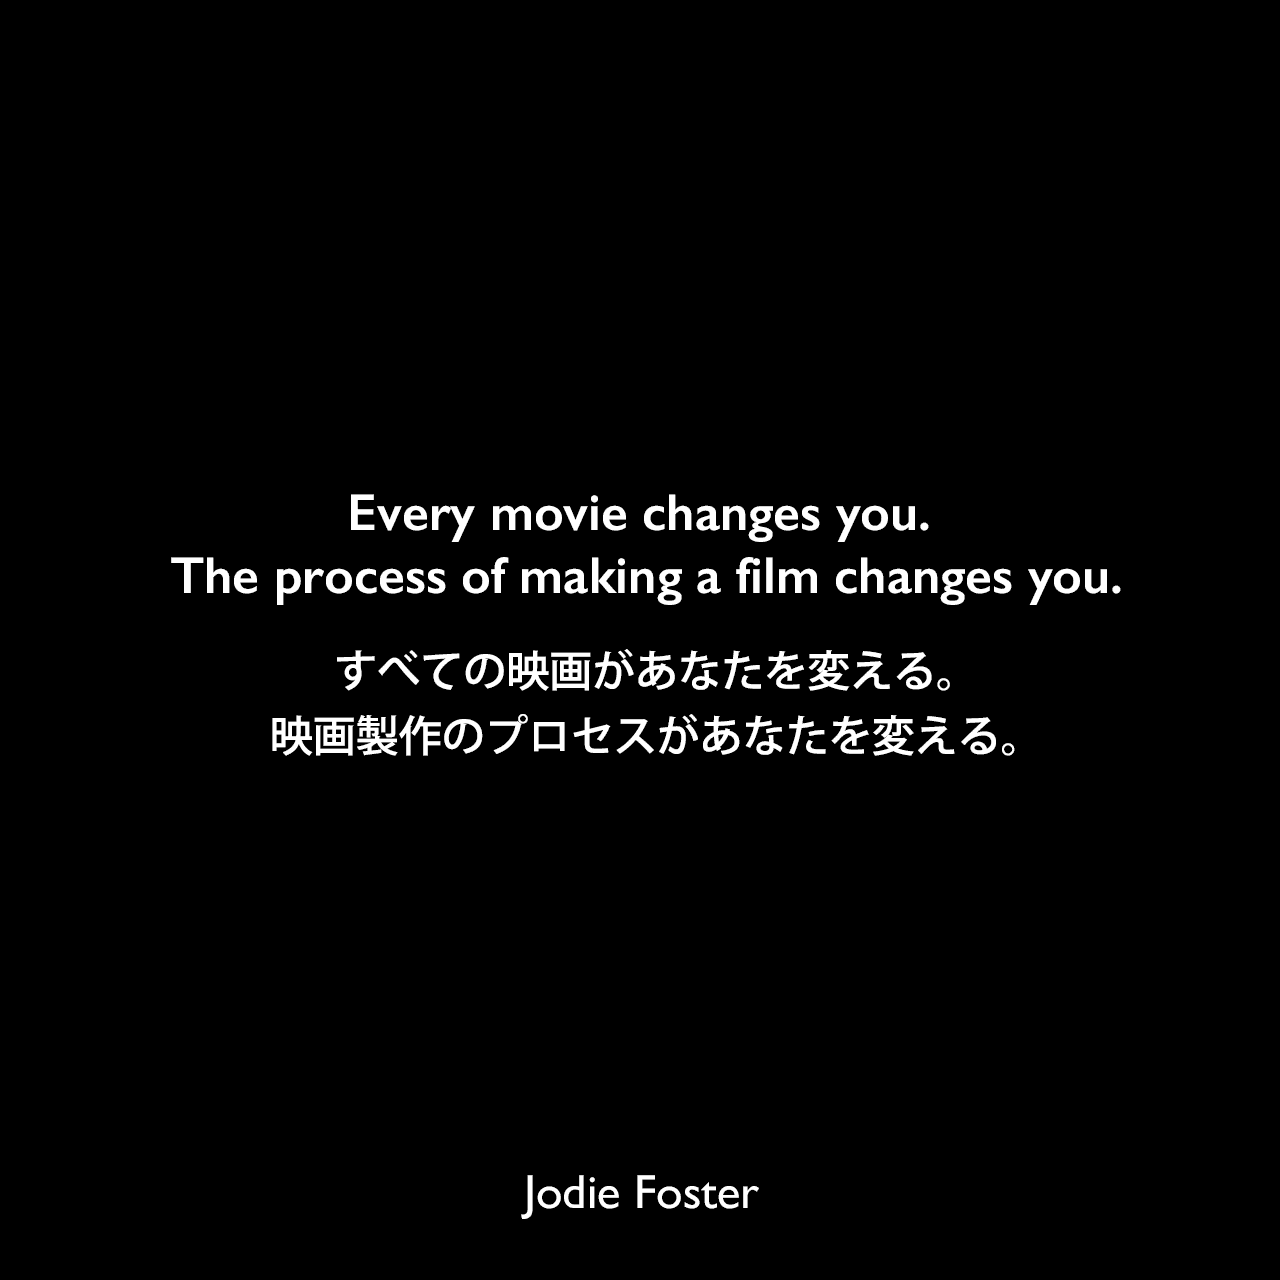 Every movie changes you. The process of making a film changes you.すべての映画があなたを変える。映画製作のプロセスがあなたを変える。Jodie Foster